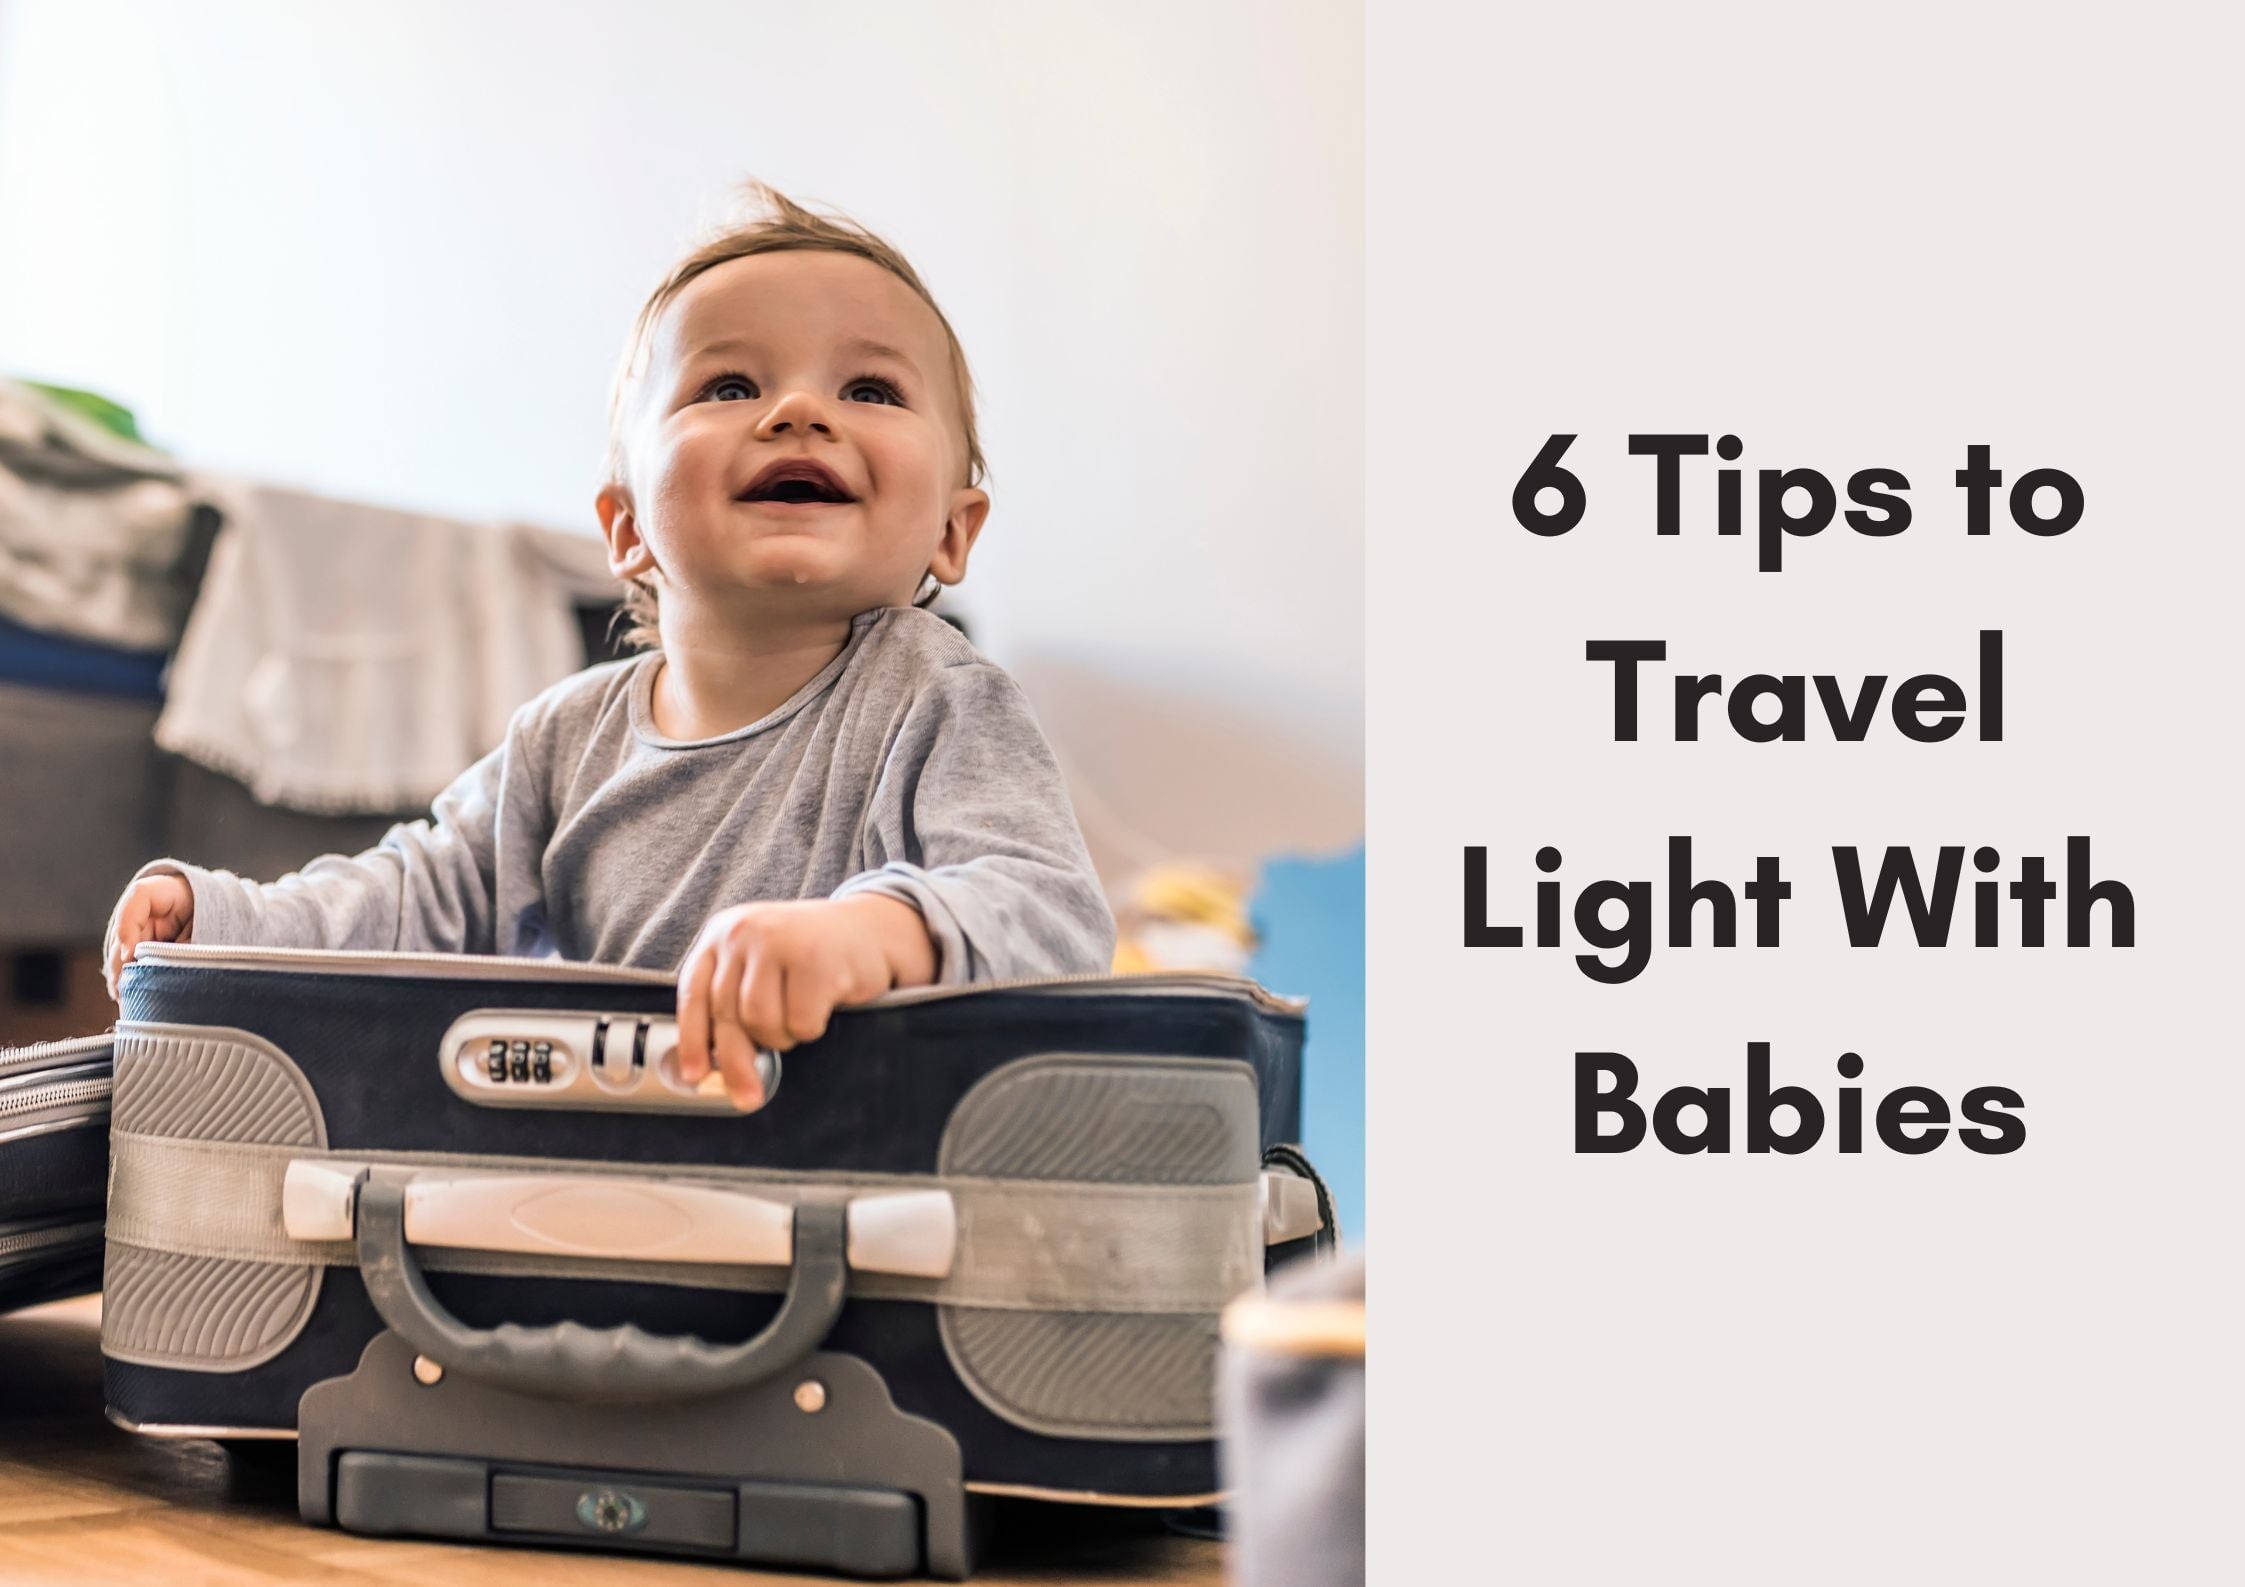 6 Tips to Travel Light With Babies